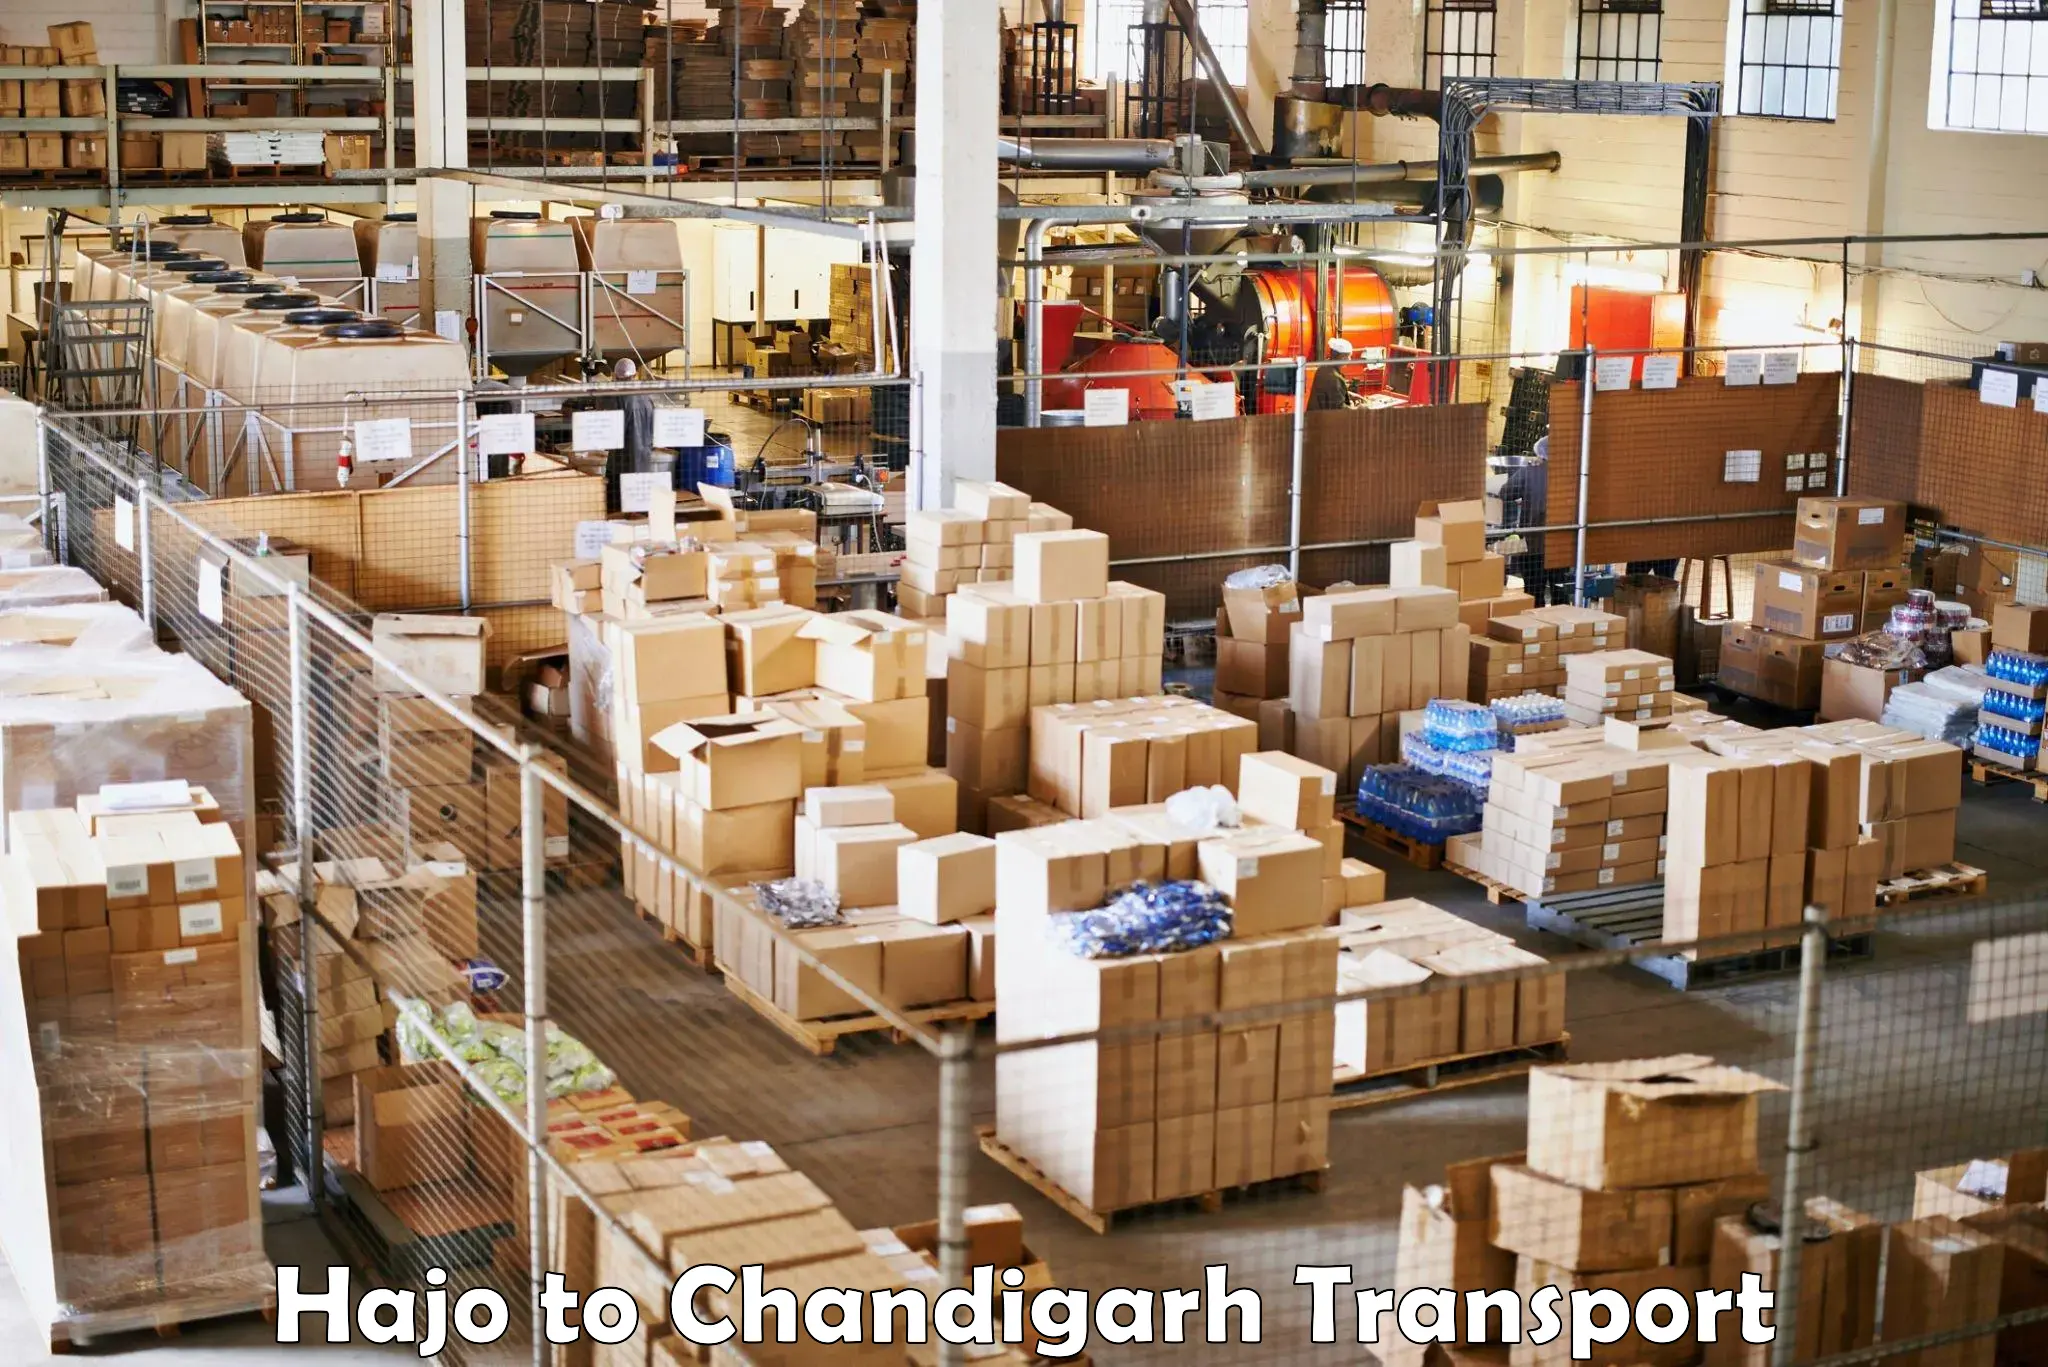 Commercial transport service Hajo to Chandigarh